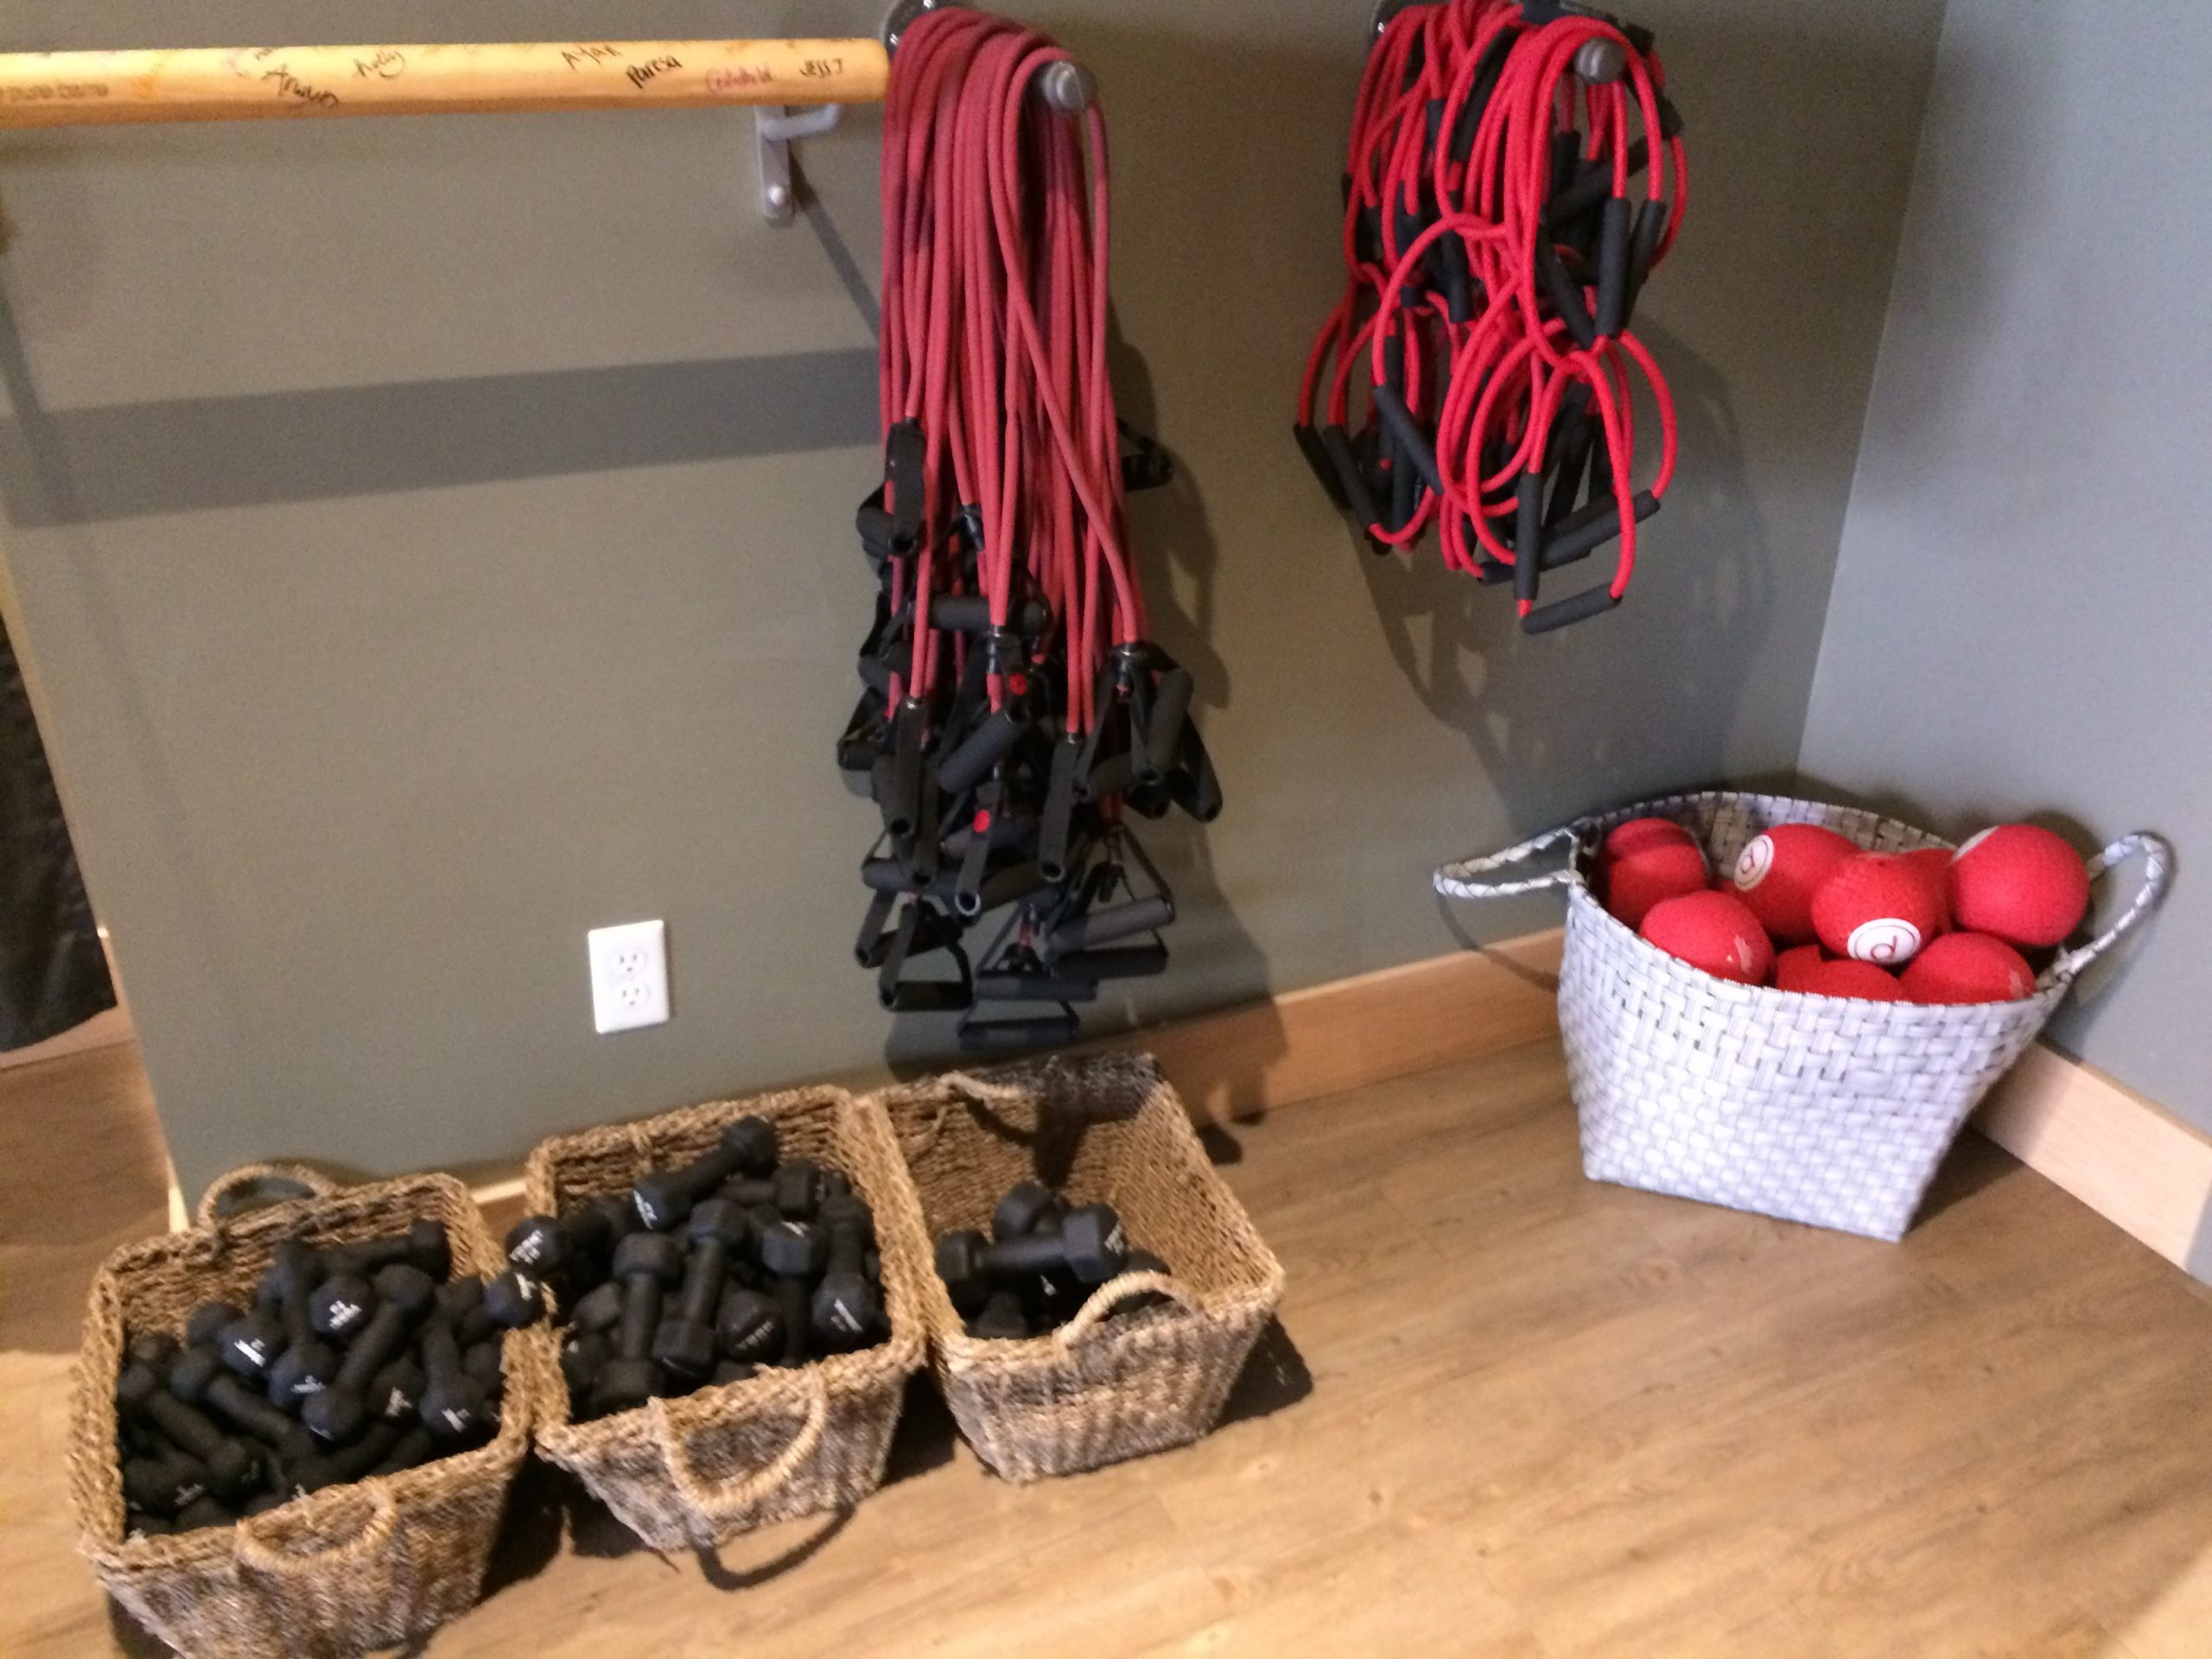 Pure Barre props in the studio, including weights, resistance bands and balls.